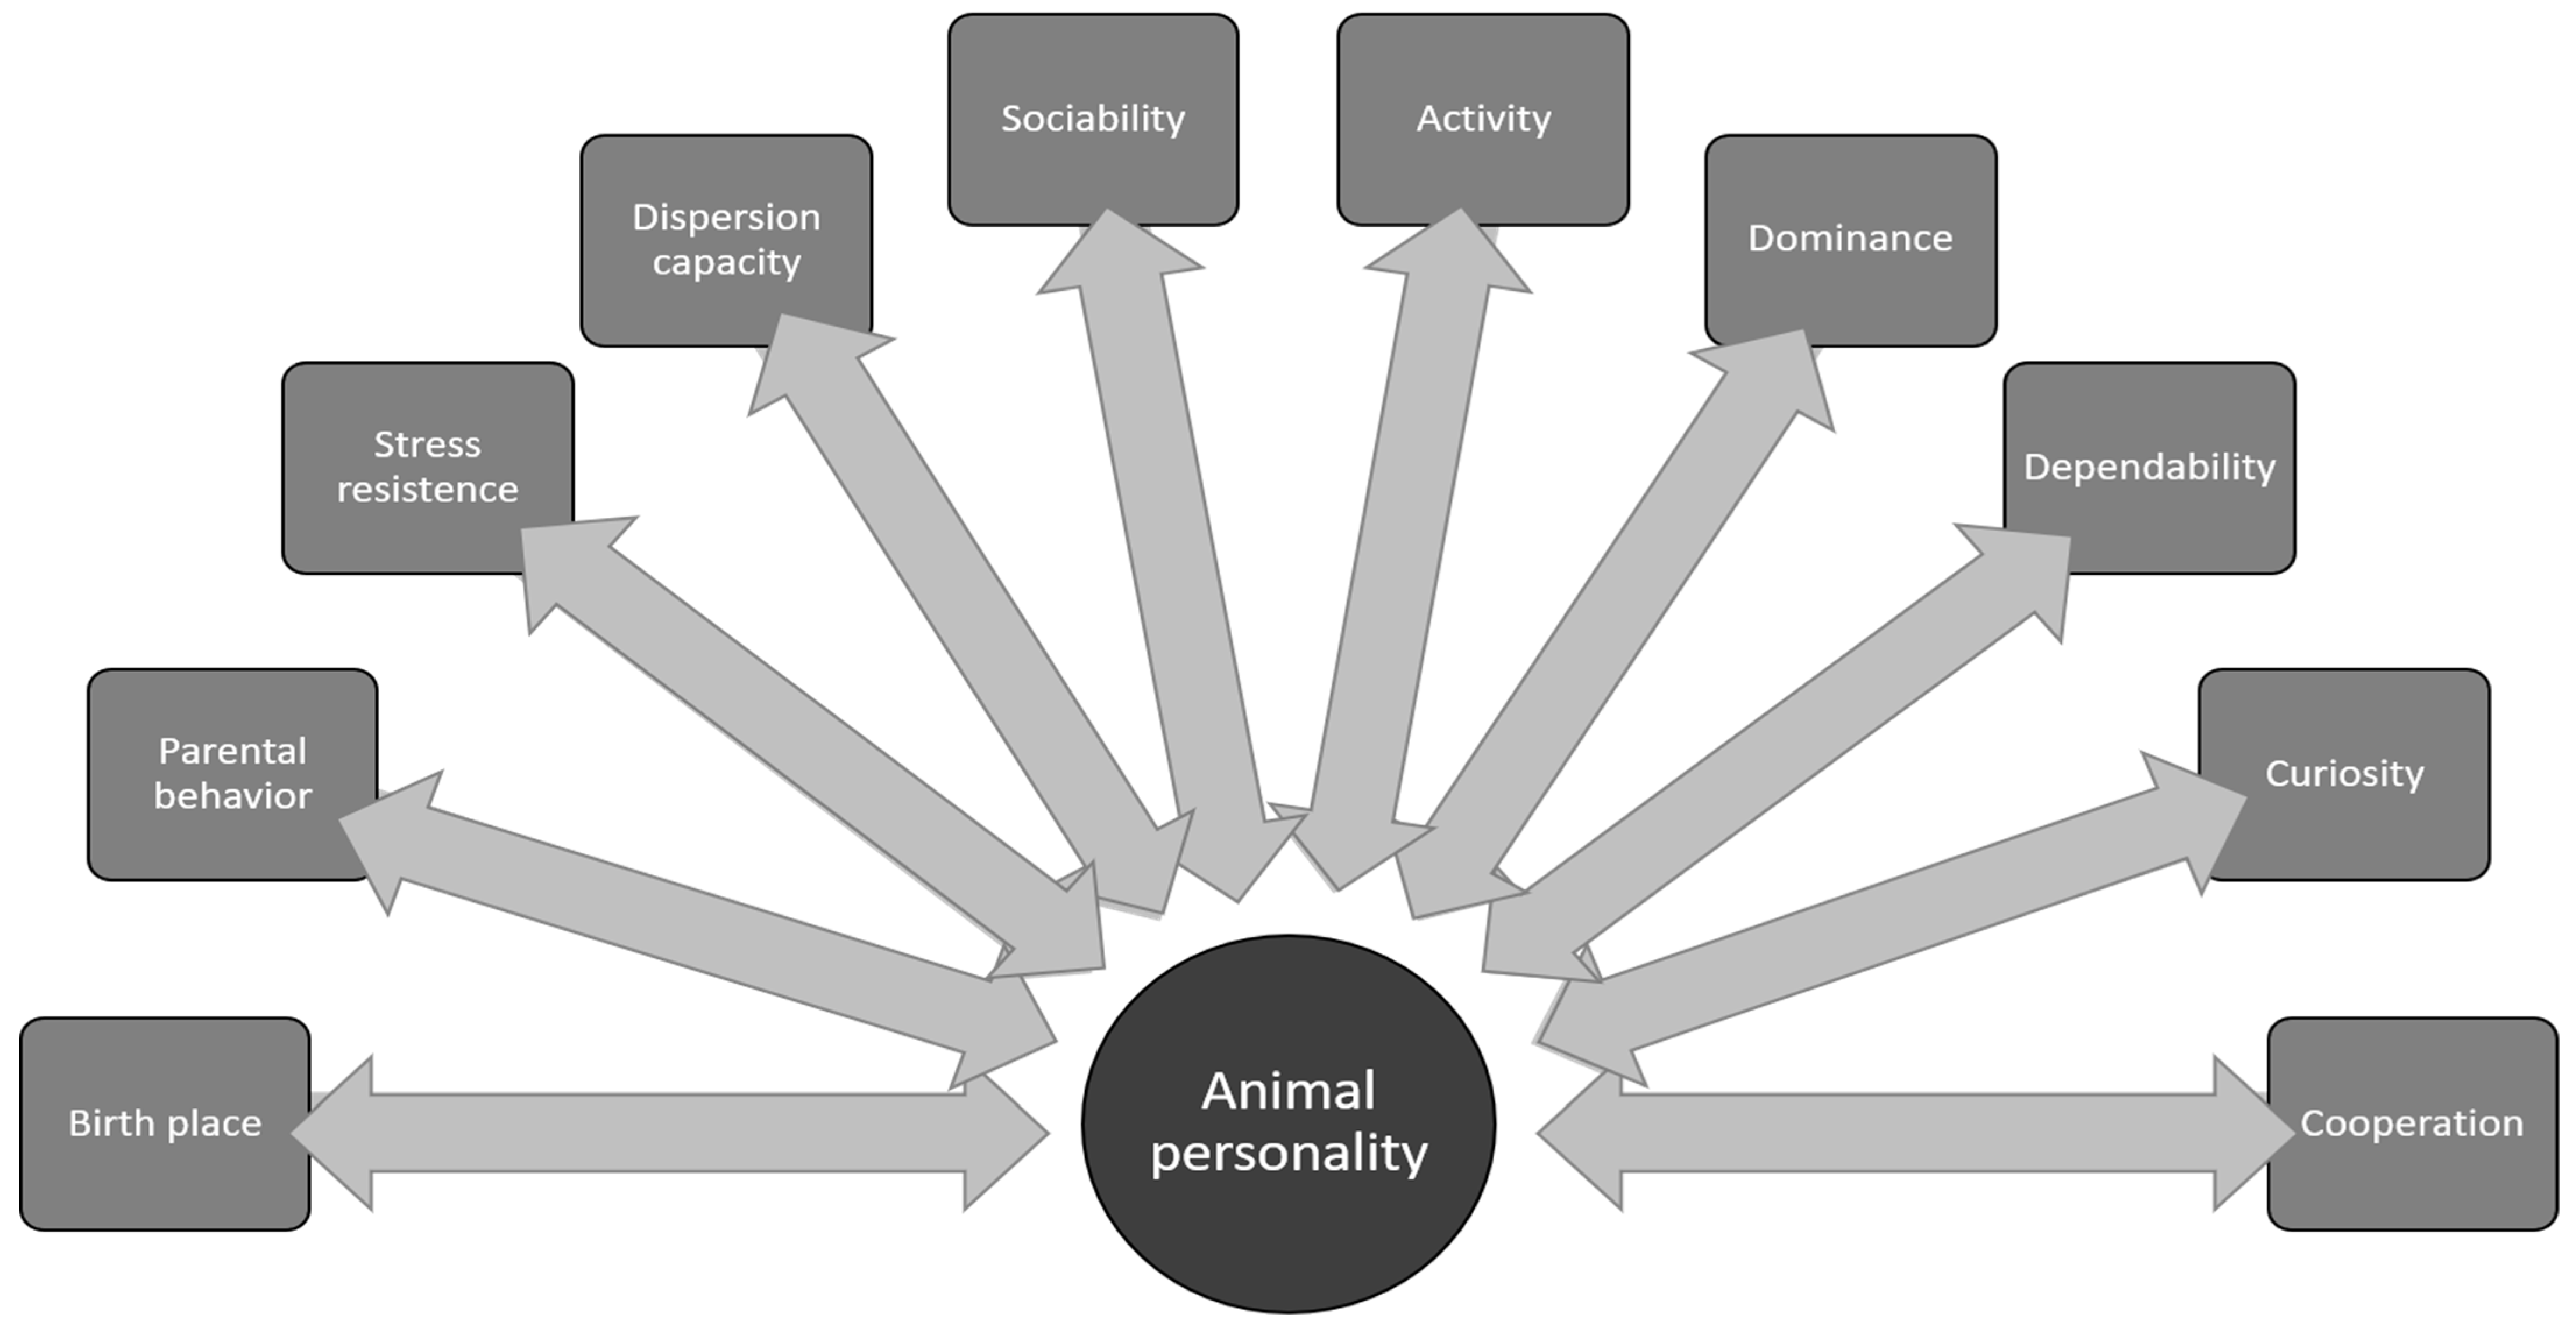 research on animal personality suggests that